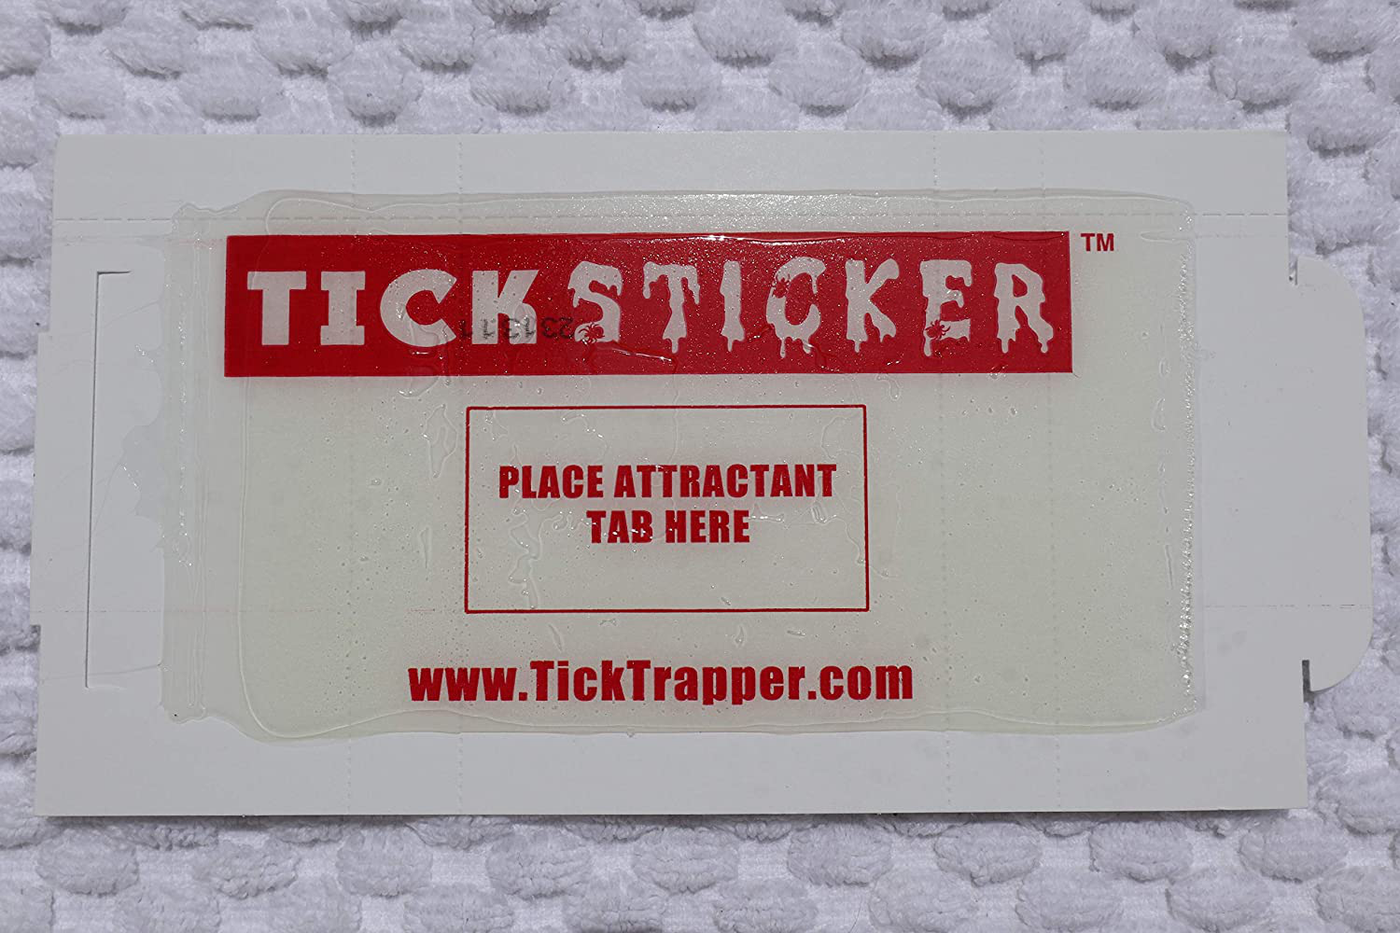 Tick Trapper Tick Sticker Flea, Tick, and Insect Trap - Non-Toxic and Easy to Use - Patent Pending Tick Attractant, Sticky Glue Traps Crawling Insects (Pack of 3)